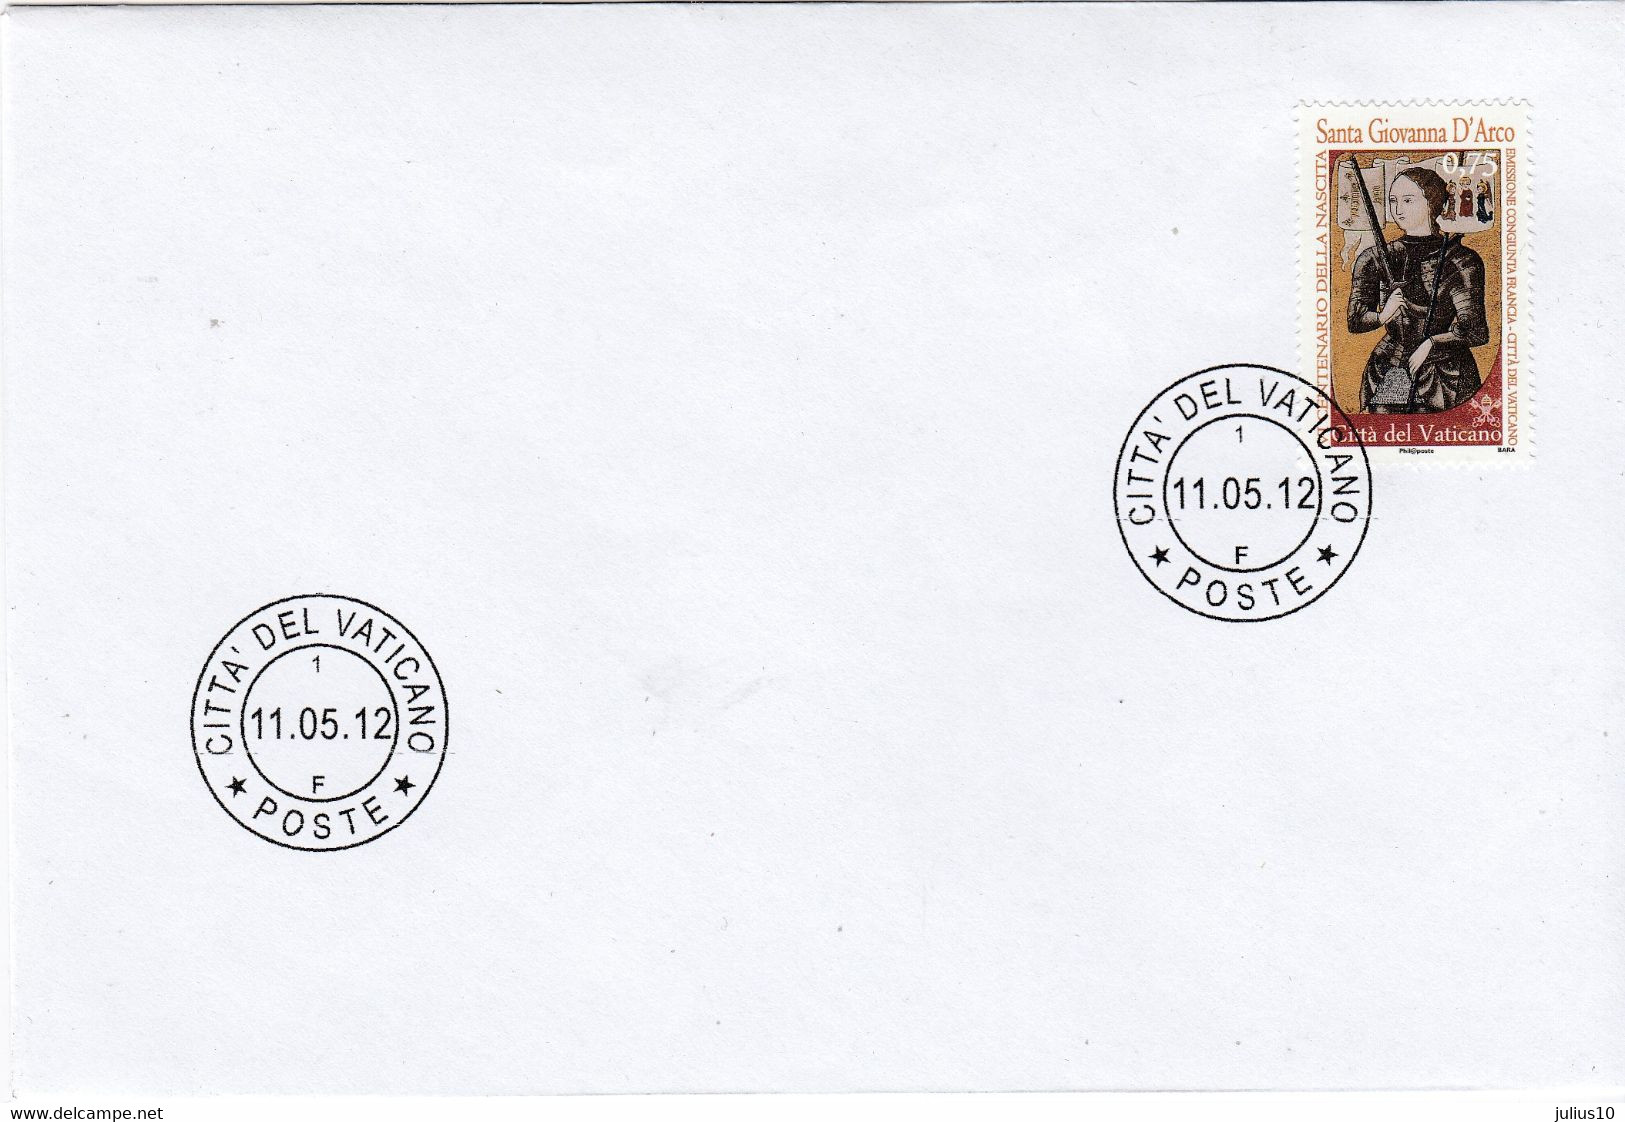 VATICANO JOINT ISSUE 2012 With Germany #29919 - Covers & Documents